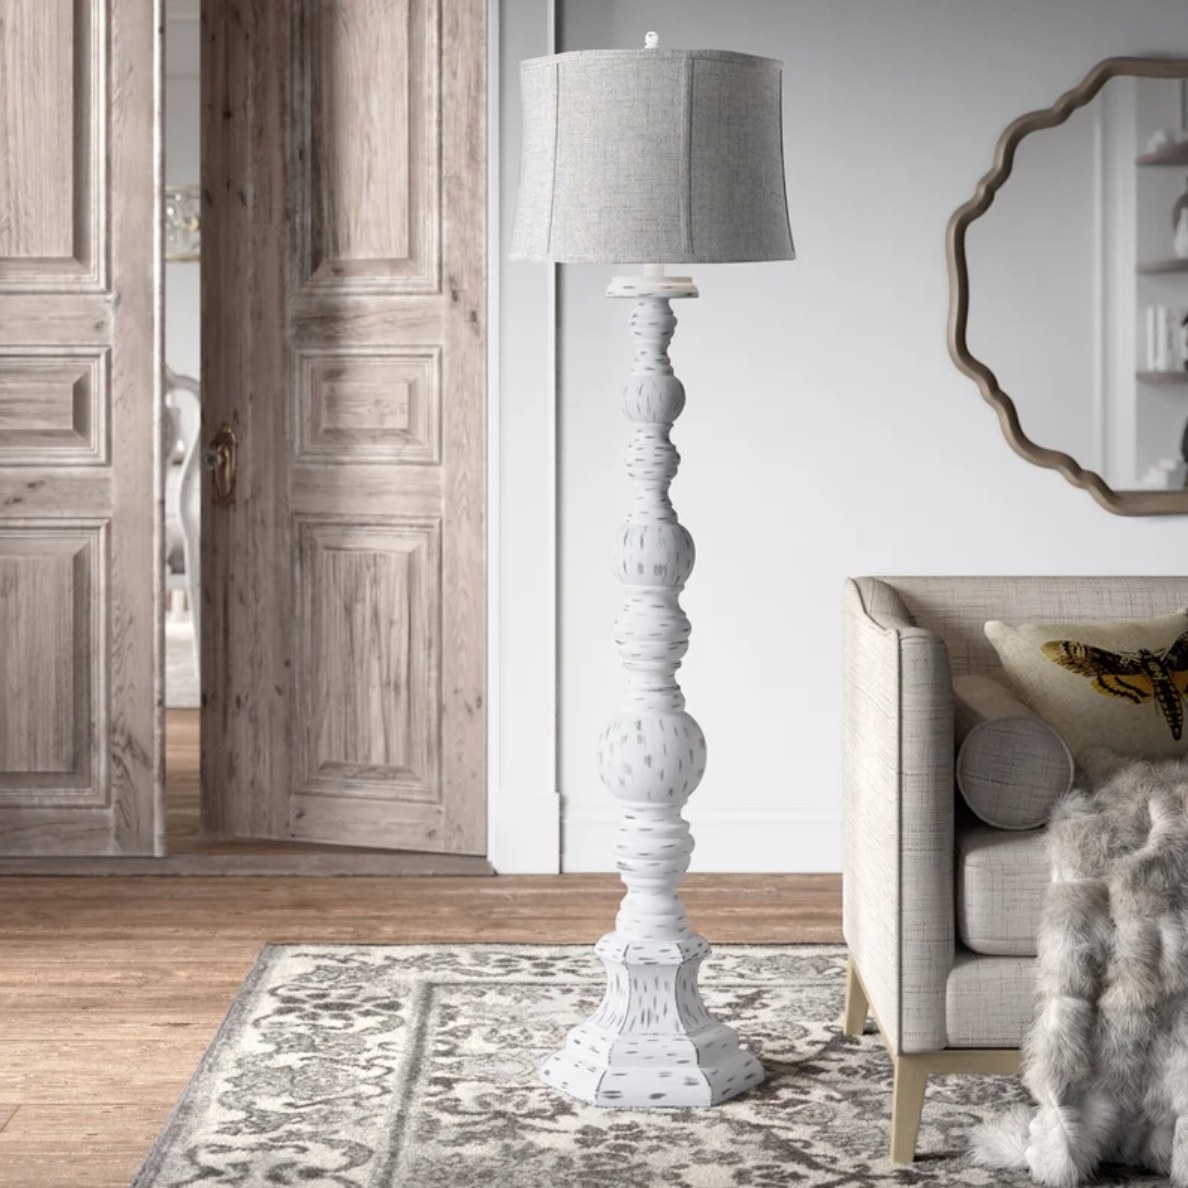 A traditional white floor lamp and lamp shade on a rug next to a couch